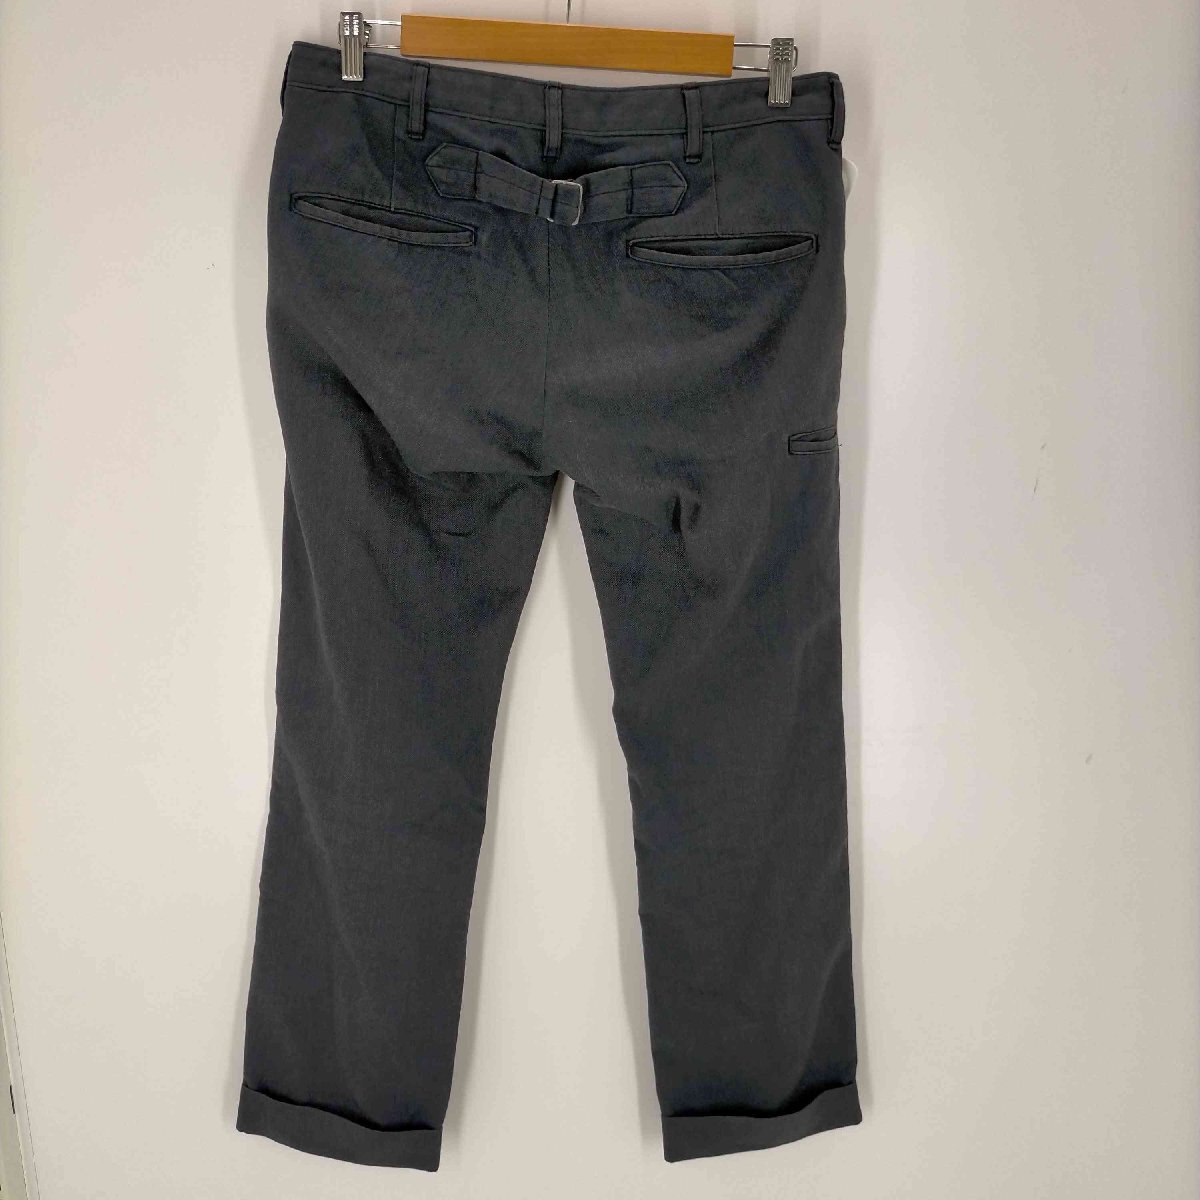 MOUNTAIN RESEARCH(マウンテンリサーチ) Piped Stem Pants パイプドステム 中古 古着 0646_画像2